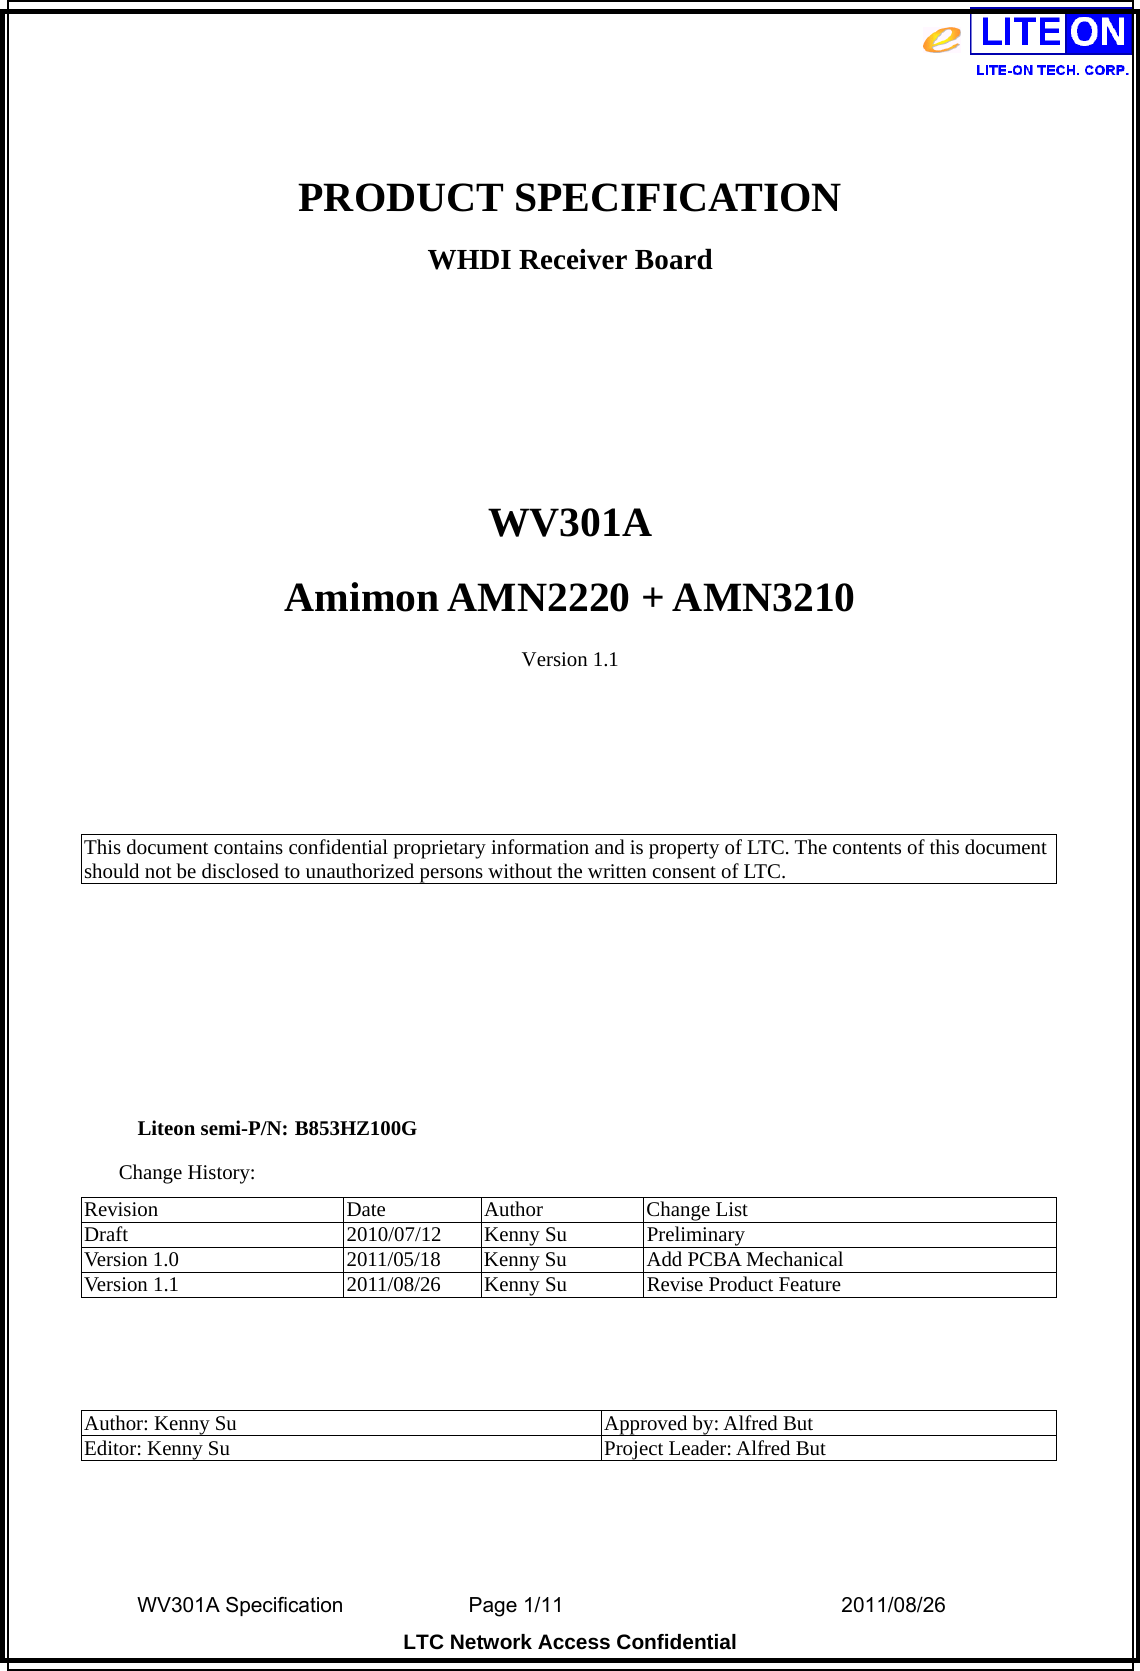  WV301A Specification                Page 1/11                                  2011/08/26  LTC Network Access Confidential  PRODUCT SPECIFICATION WHDI Receiver Board    WV301A Amimon AMN2220 + AMN3210 Version 1.1     This document contains confidential proprietary information and is property of LTC. The contents of this document should not be disclosed to unauthorized persons without the written consent of LTC.       Liteon semi-P/N: B853HZ100G Change History: Revision Date Author Change List Draft 2010/07/12 Kenny Su Preliminary Version 1.0  2011/05/18  Kenny Su  Add PCBA Mechanical Version 1.1  2011/08/26  Kenny Su  Revise Product Feature    Author: Kenny Su  Approved by: Alfred But Editor: Kenny Su  Project Leader: Alfred But  